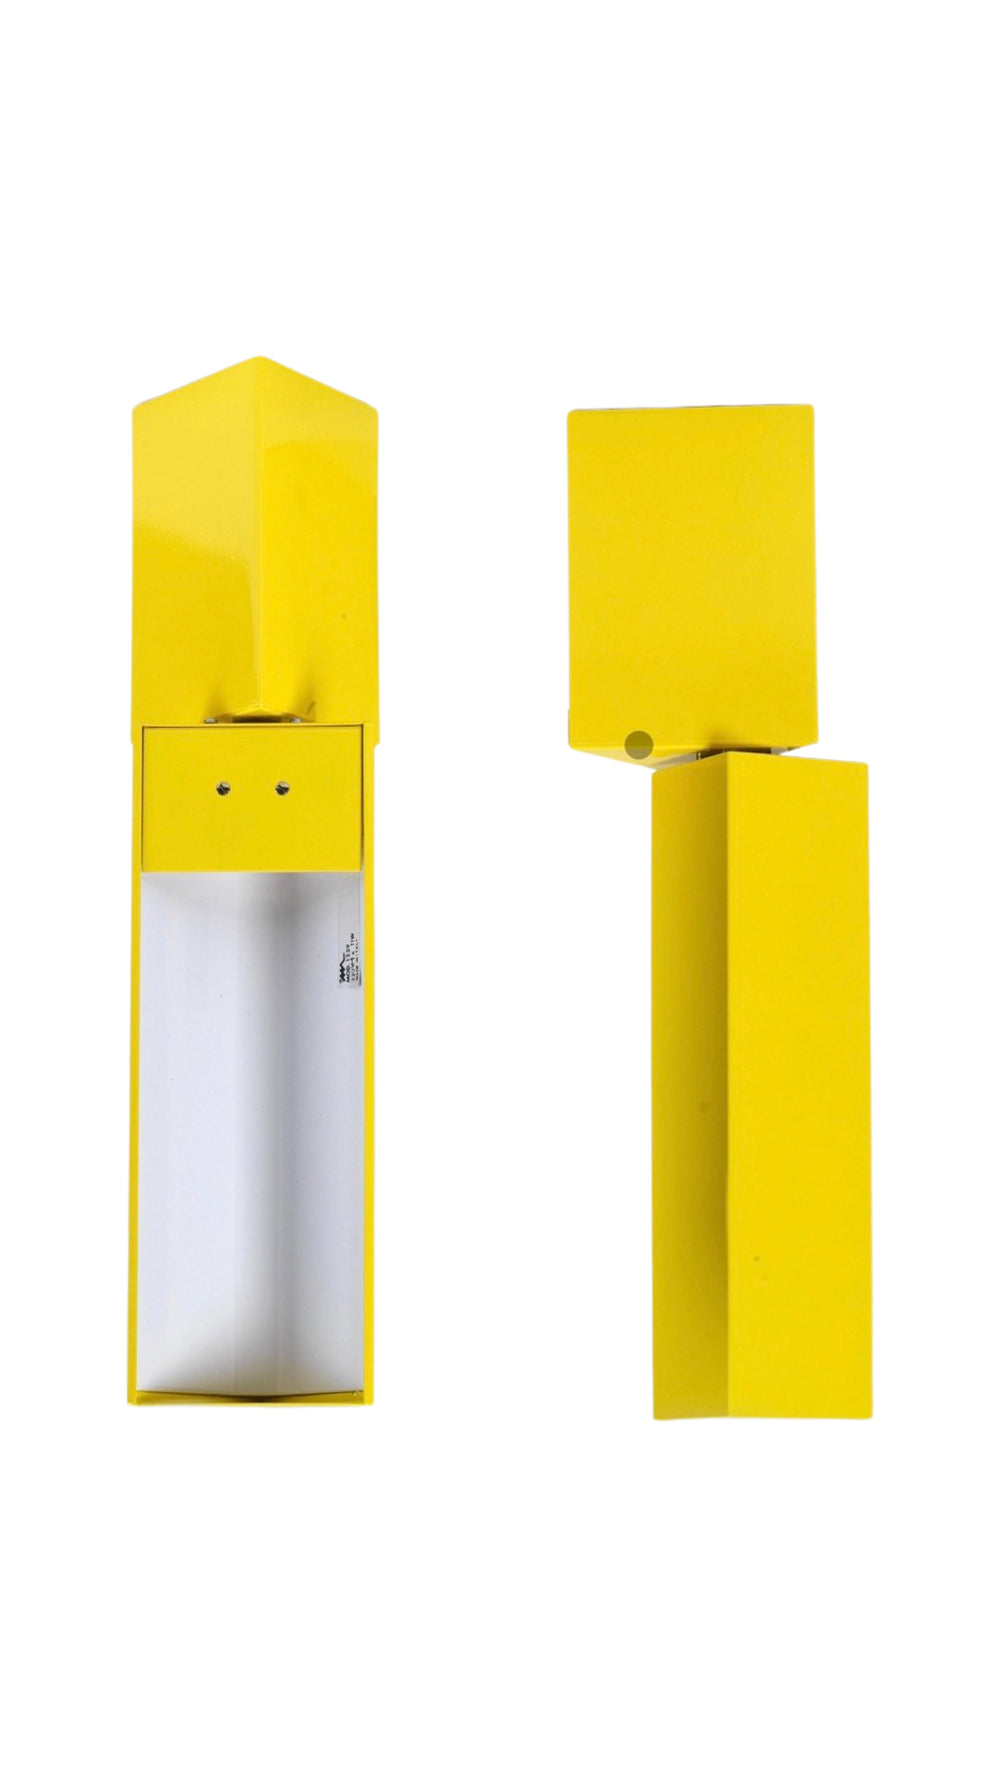 Elio Martinelli pair of model 1239 yellow all or ceiling lamps for Martinelli Luce, Italy, 1970s